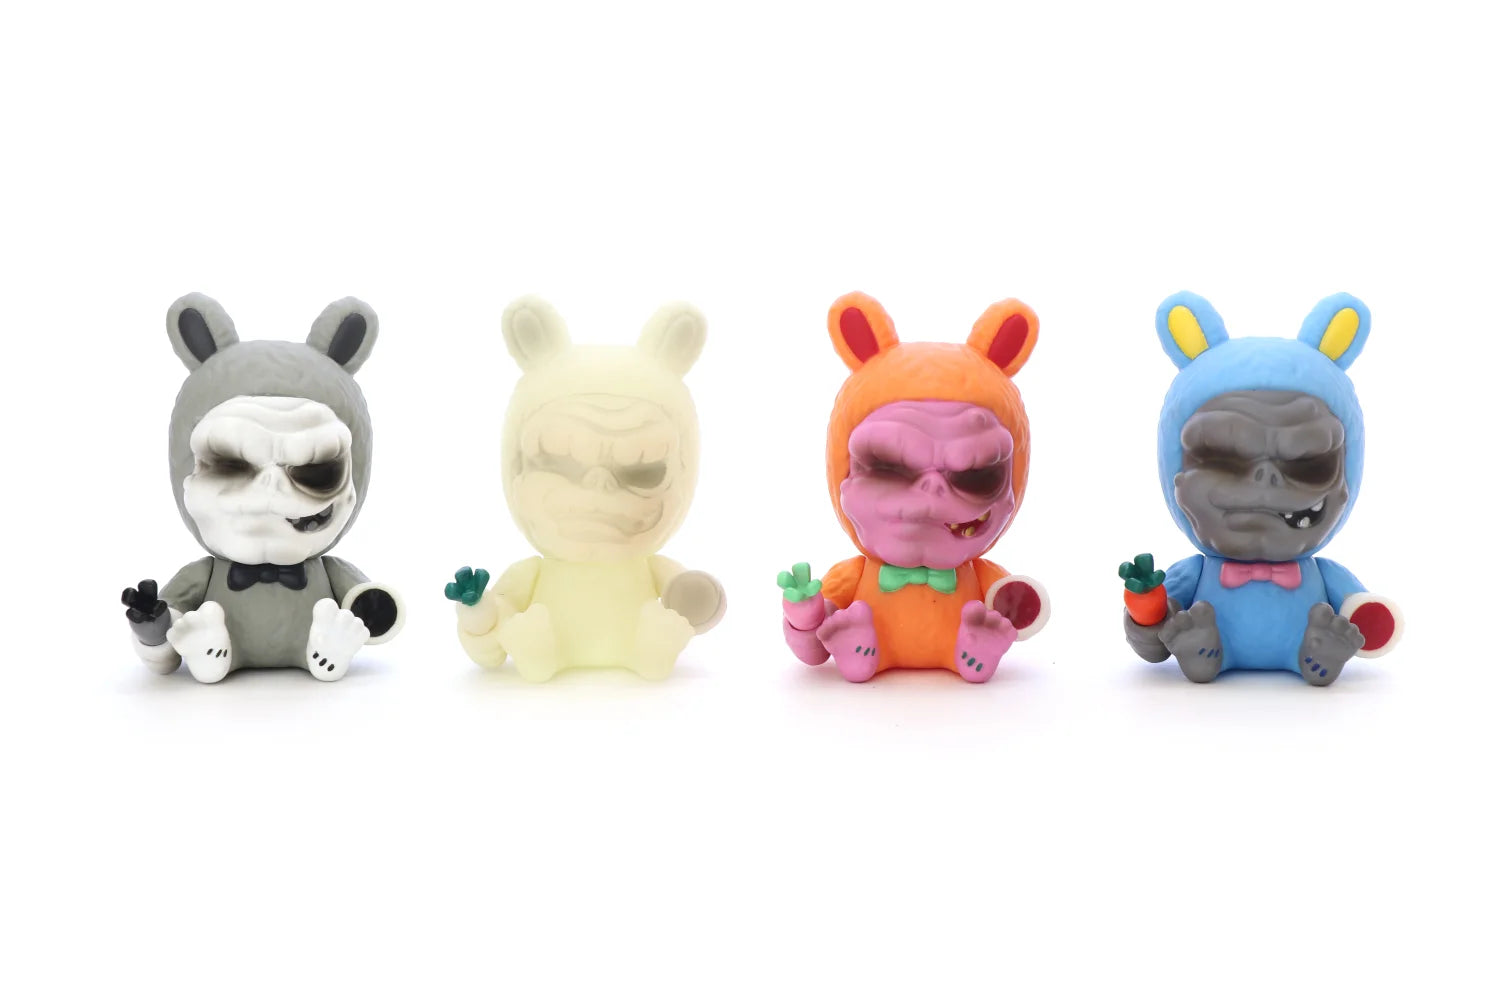 UNBOX & FIENDS MEATS Blind Box Series by Retroband